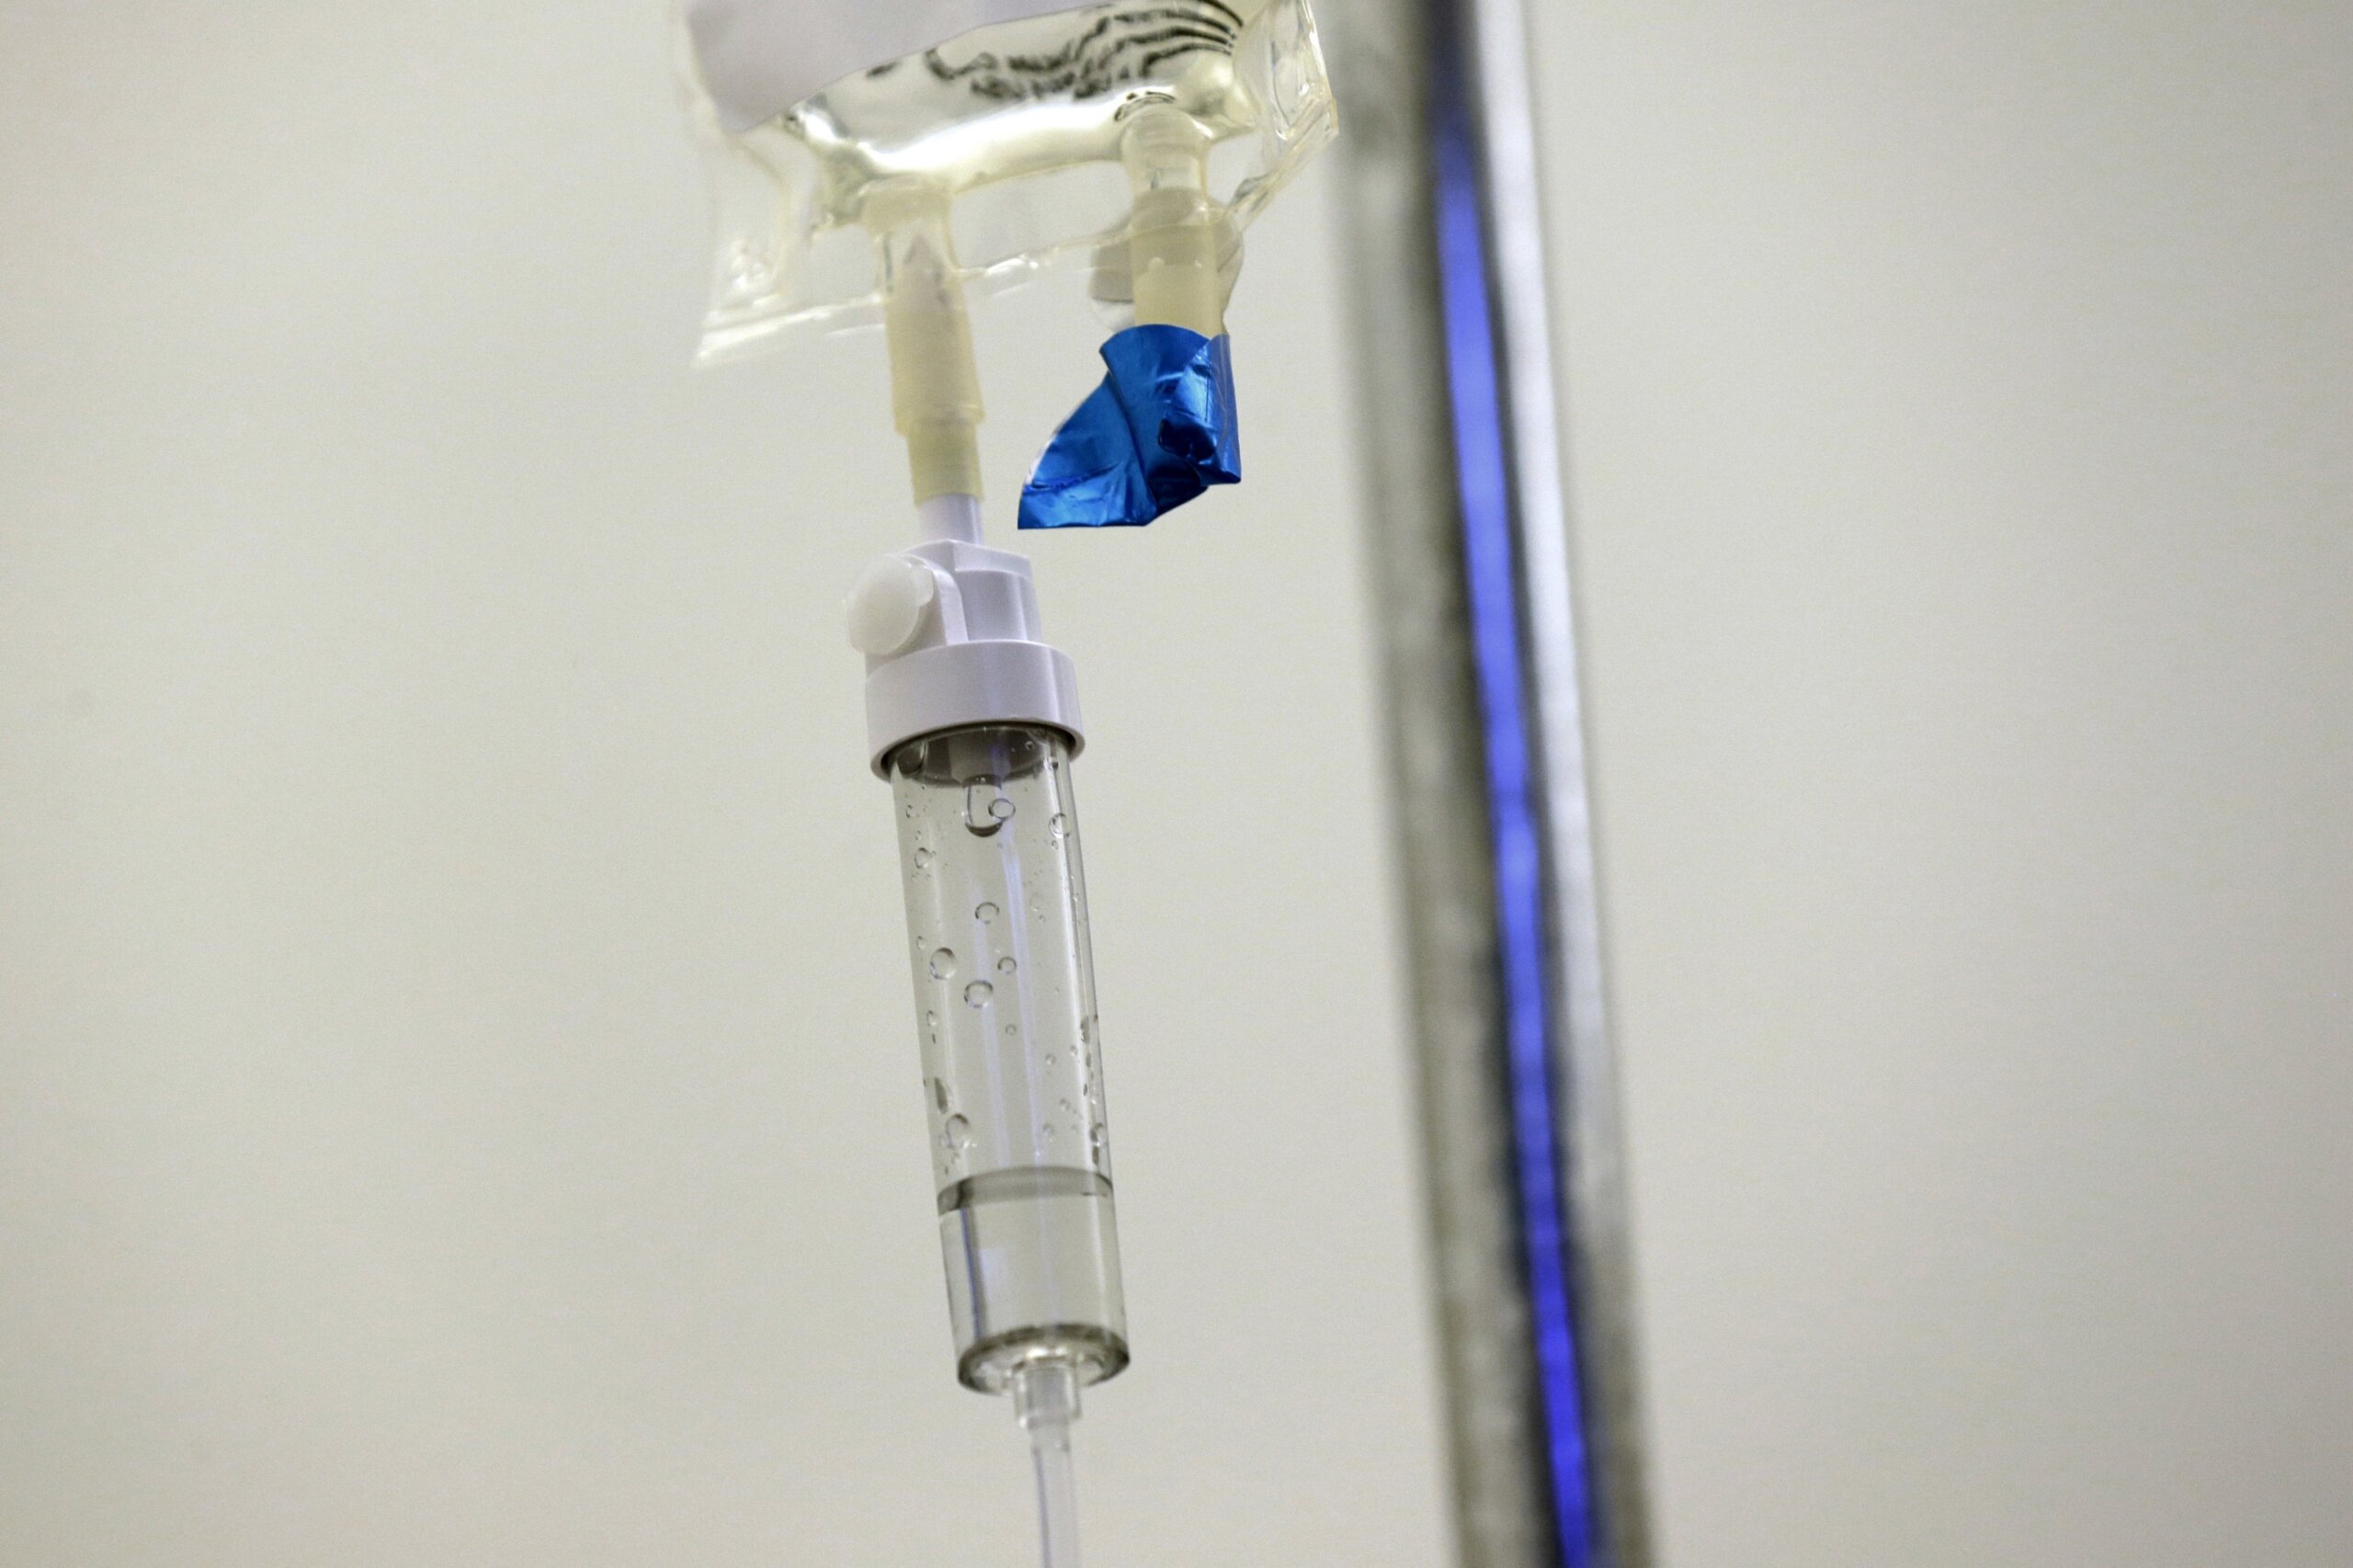 Cancer centers say US chemotherapy shortage is leading to treatment